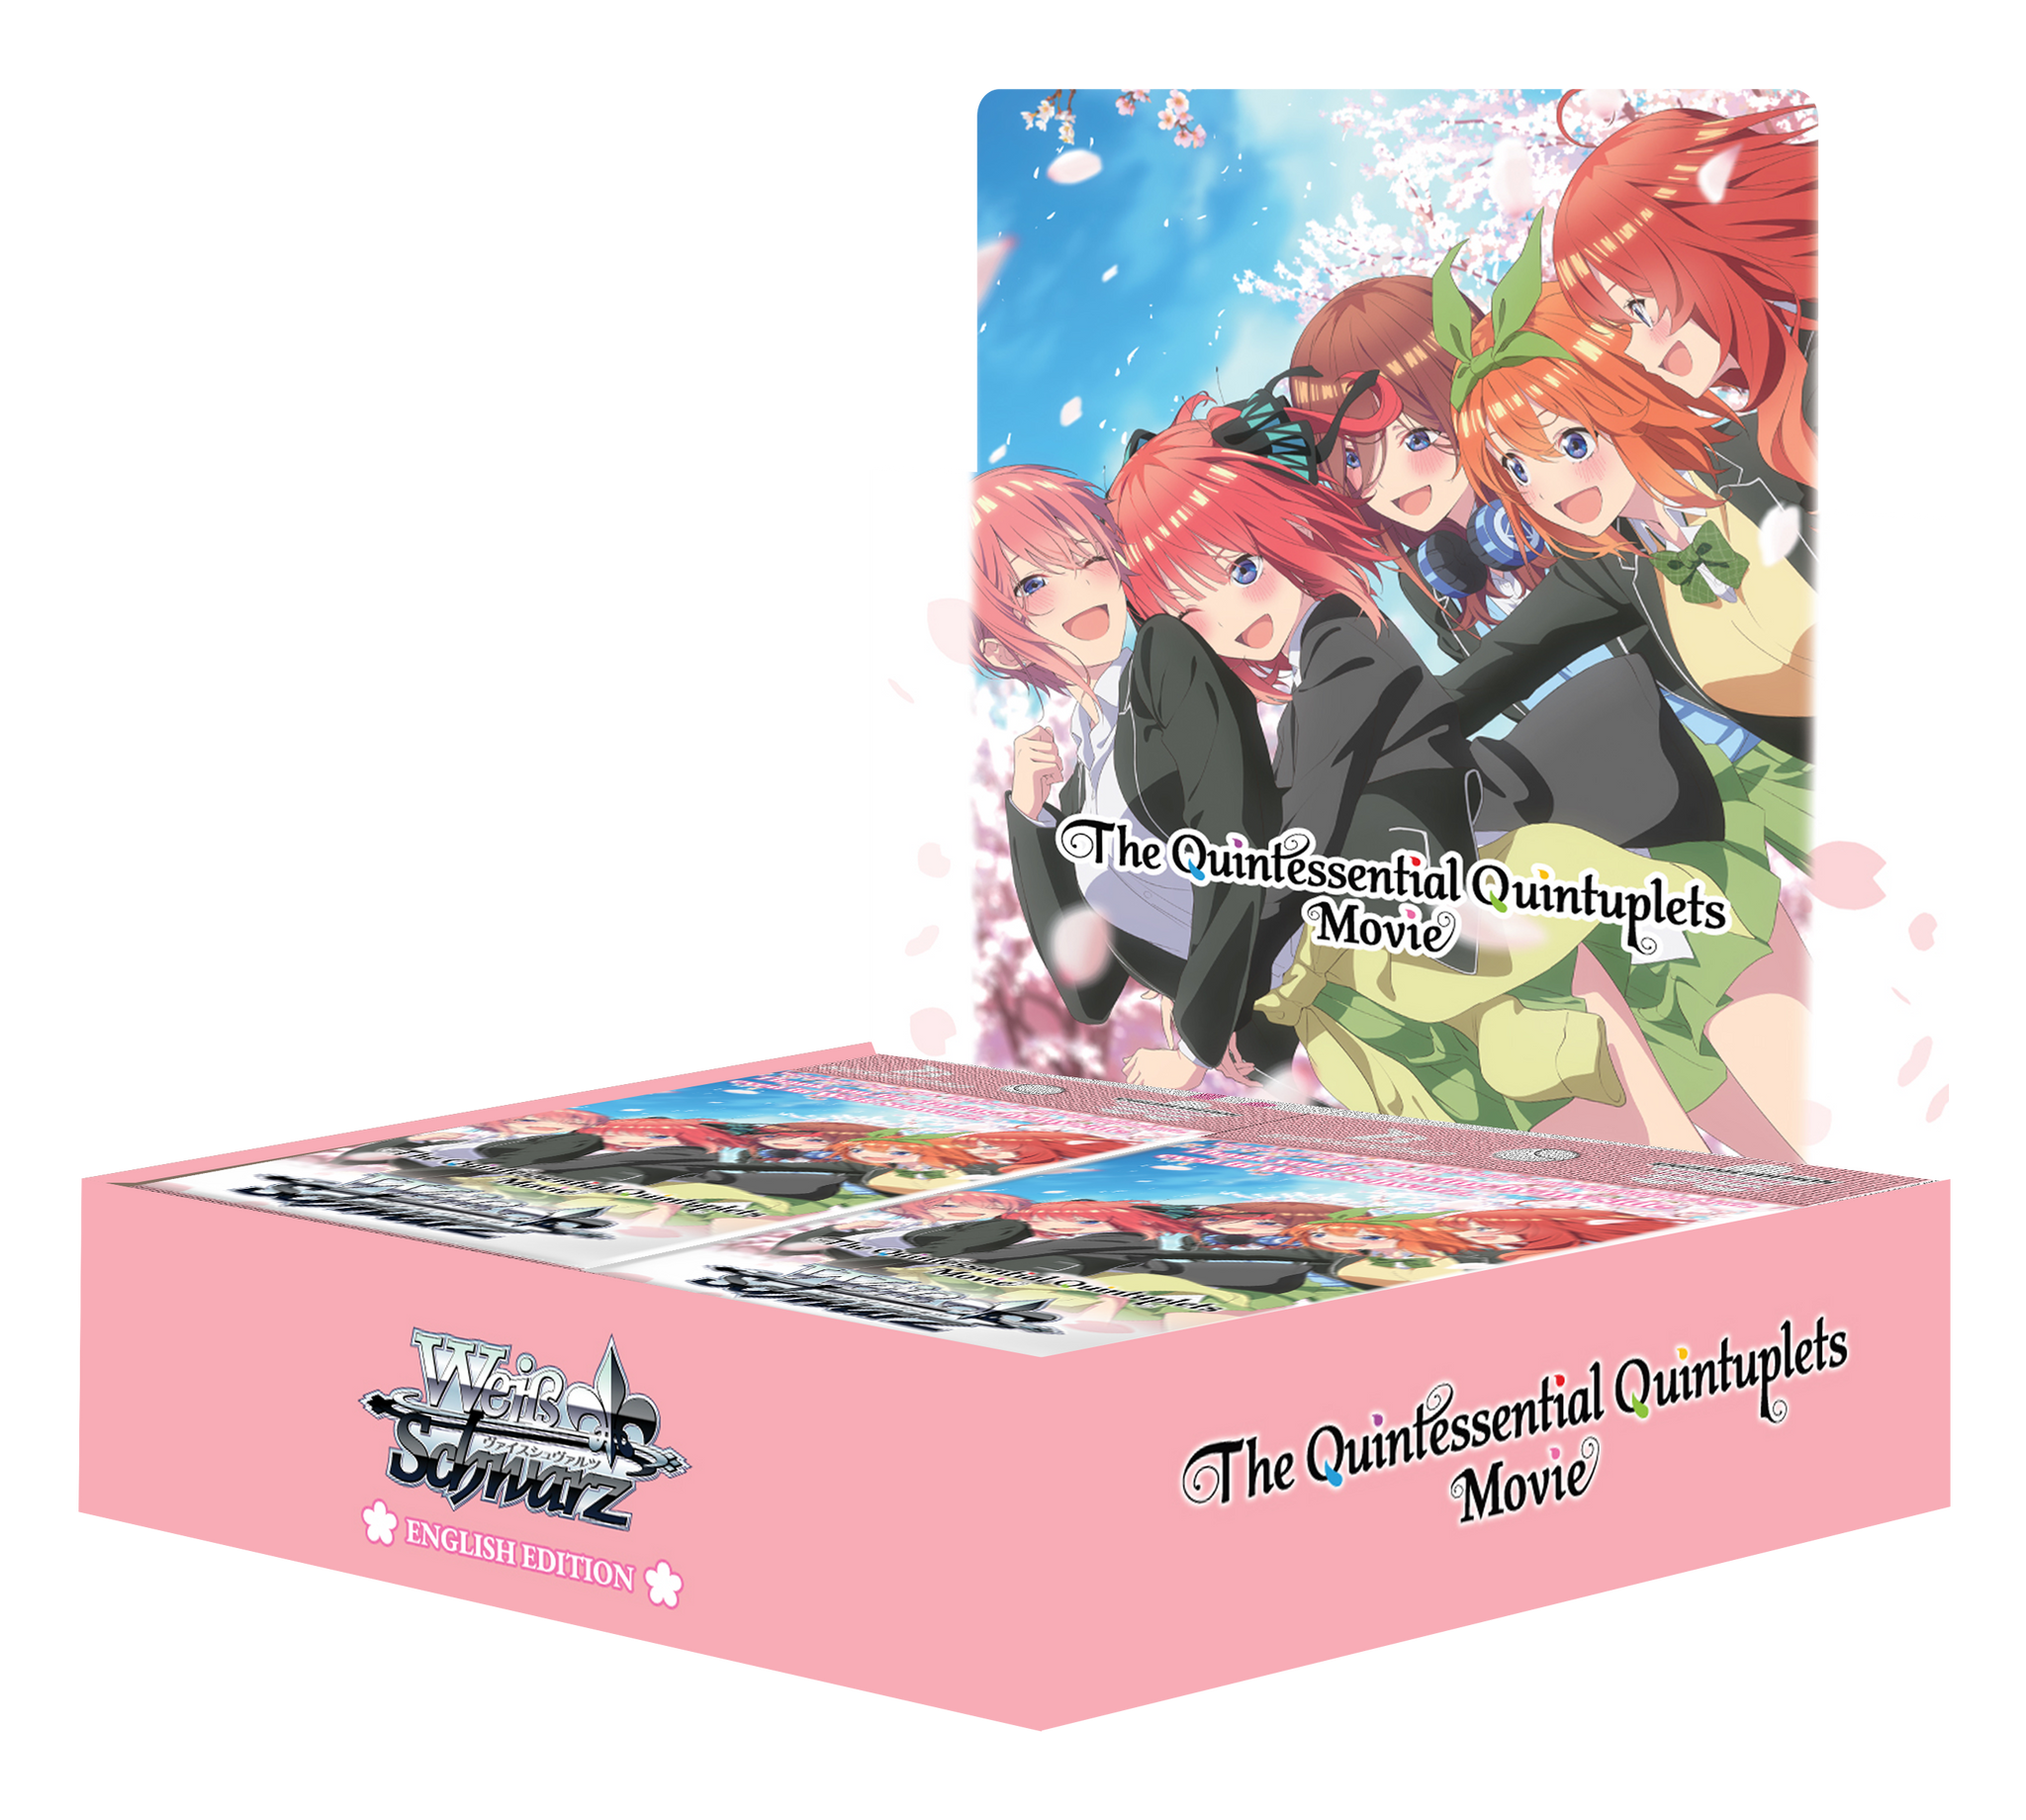 Weiss Schwarz: The Quintessential Quintuplets Movie Booster Box 1st Edition